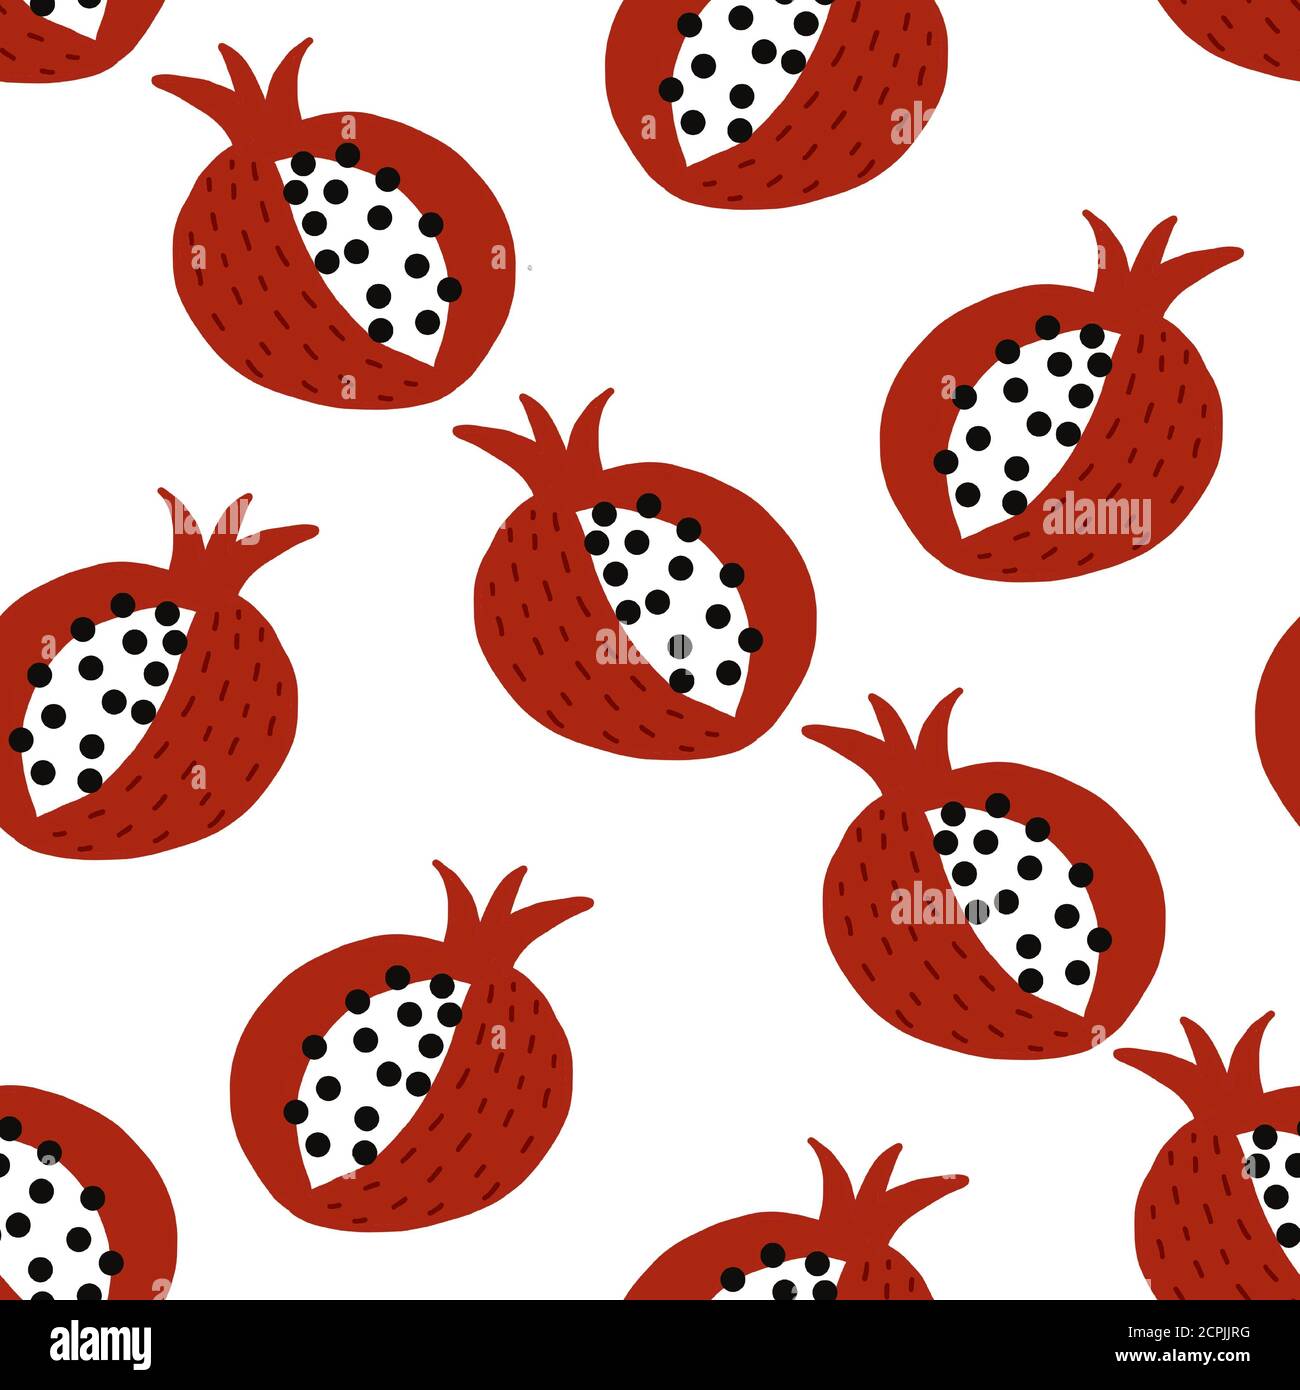 bright illustration. fruits and berries background. cartoon and flat fruits. grenades Stock Photo